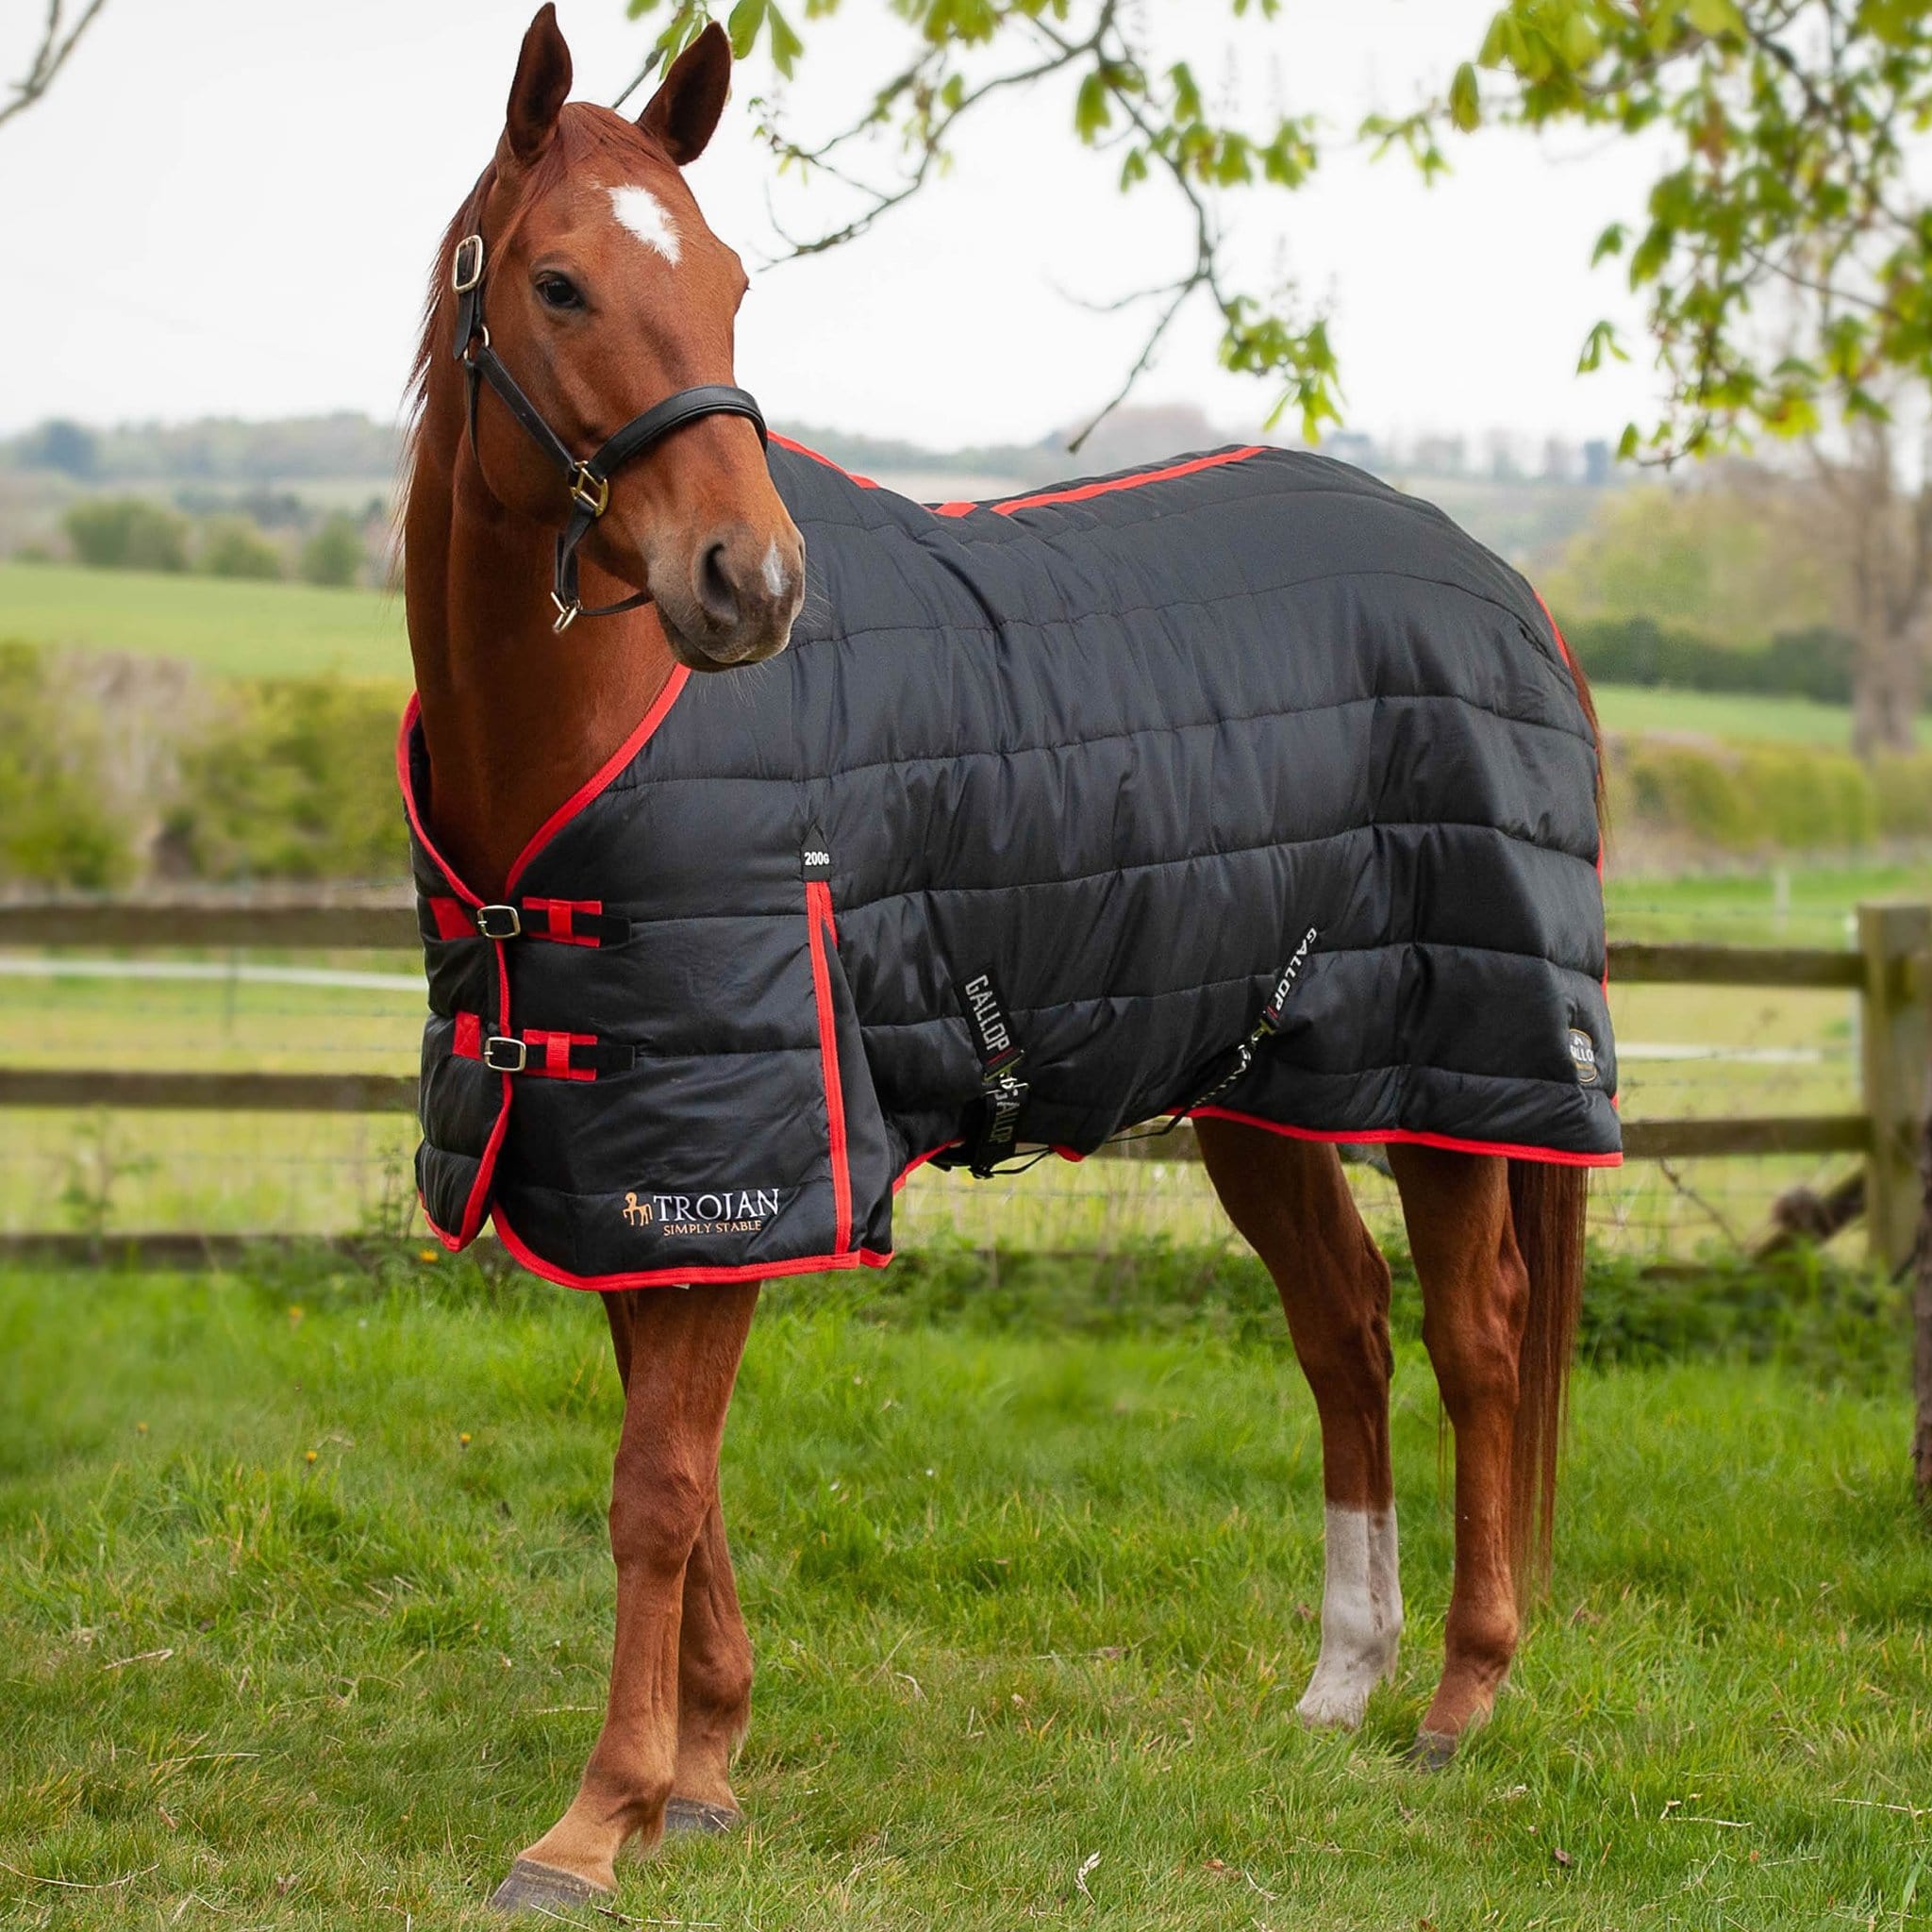 Gallop Trojan Mediumweight 200g Standard Neck Stable Rug Black and Red 2101